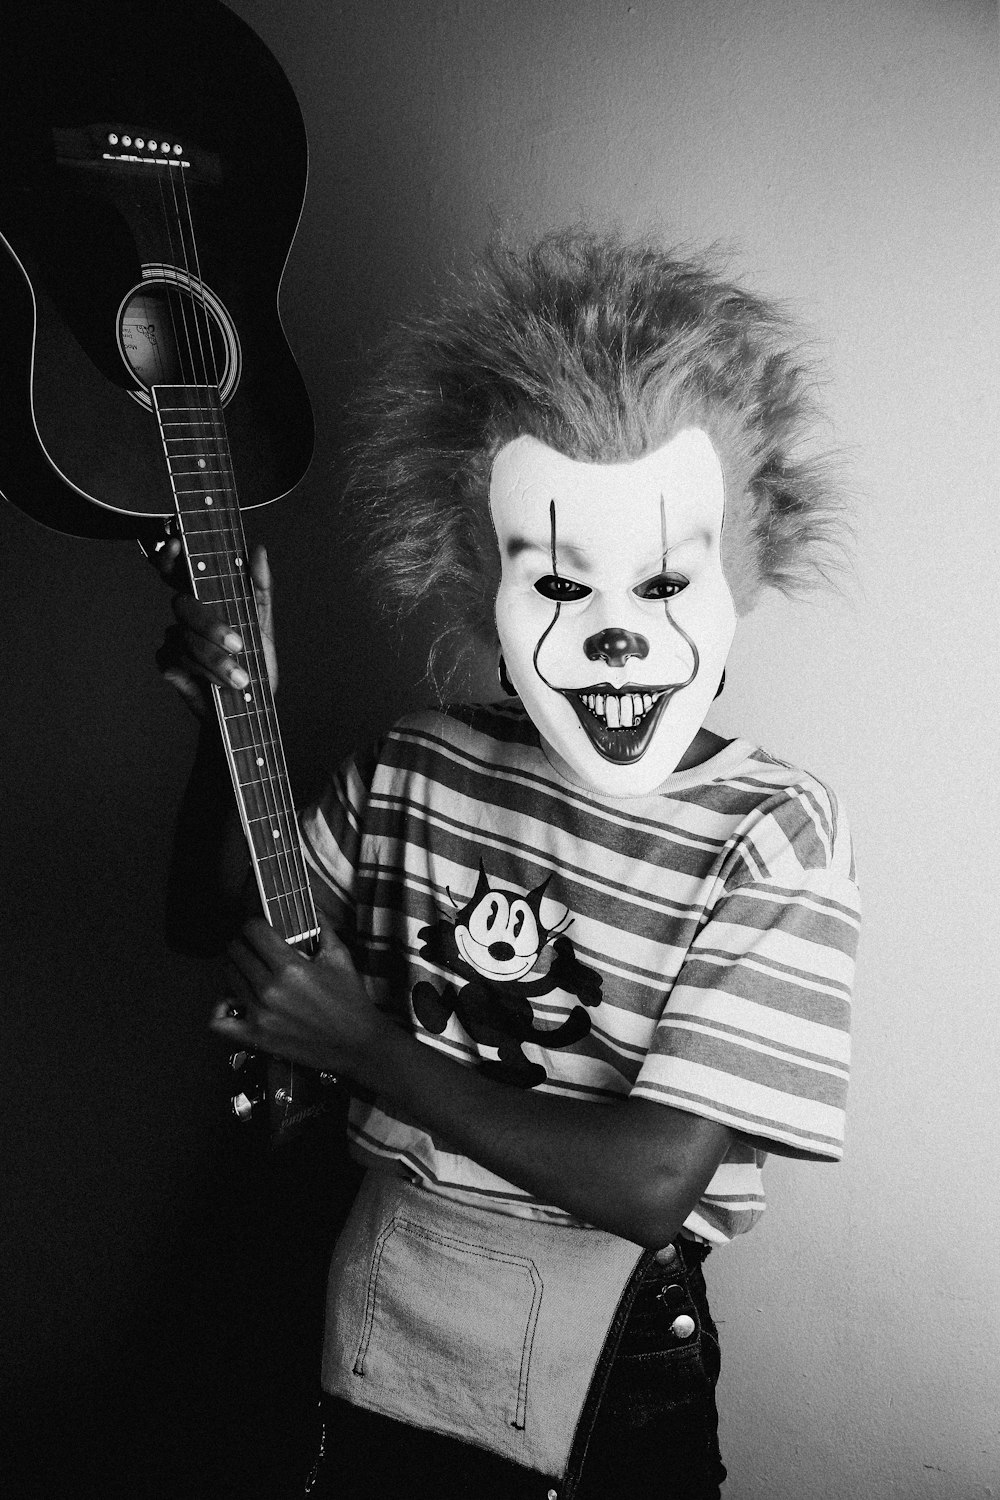 a young boy with a clown makeup holding a guitar